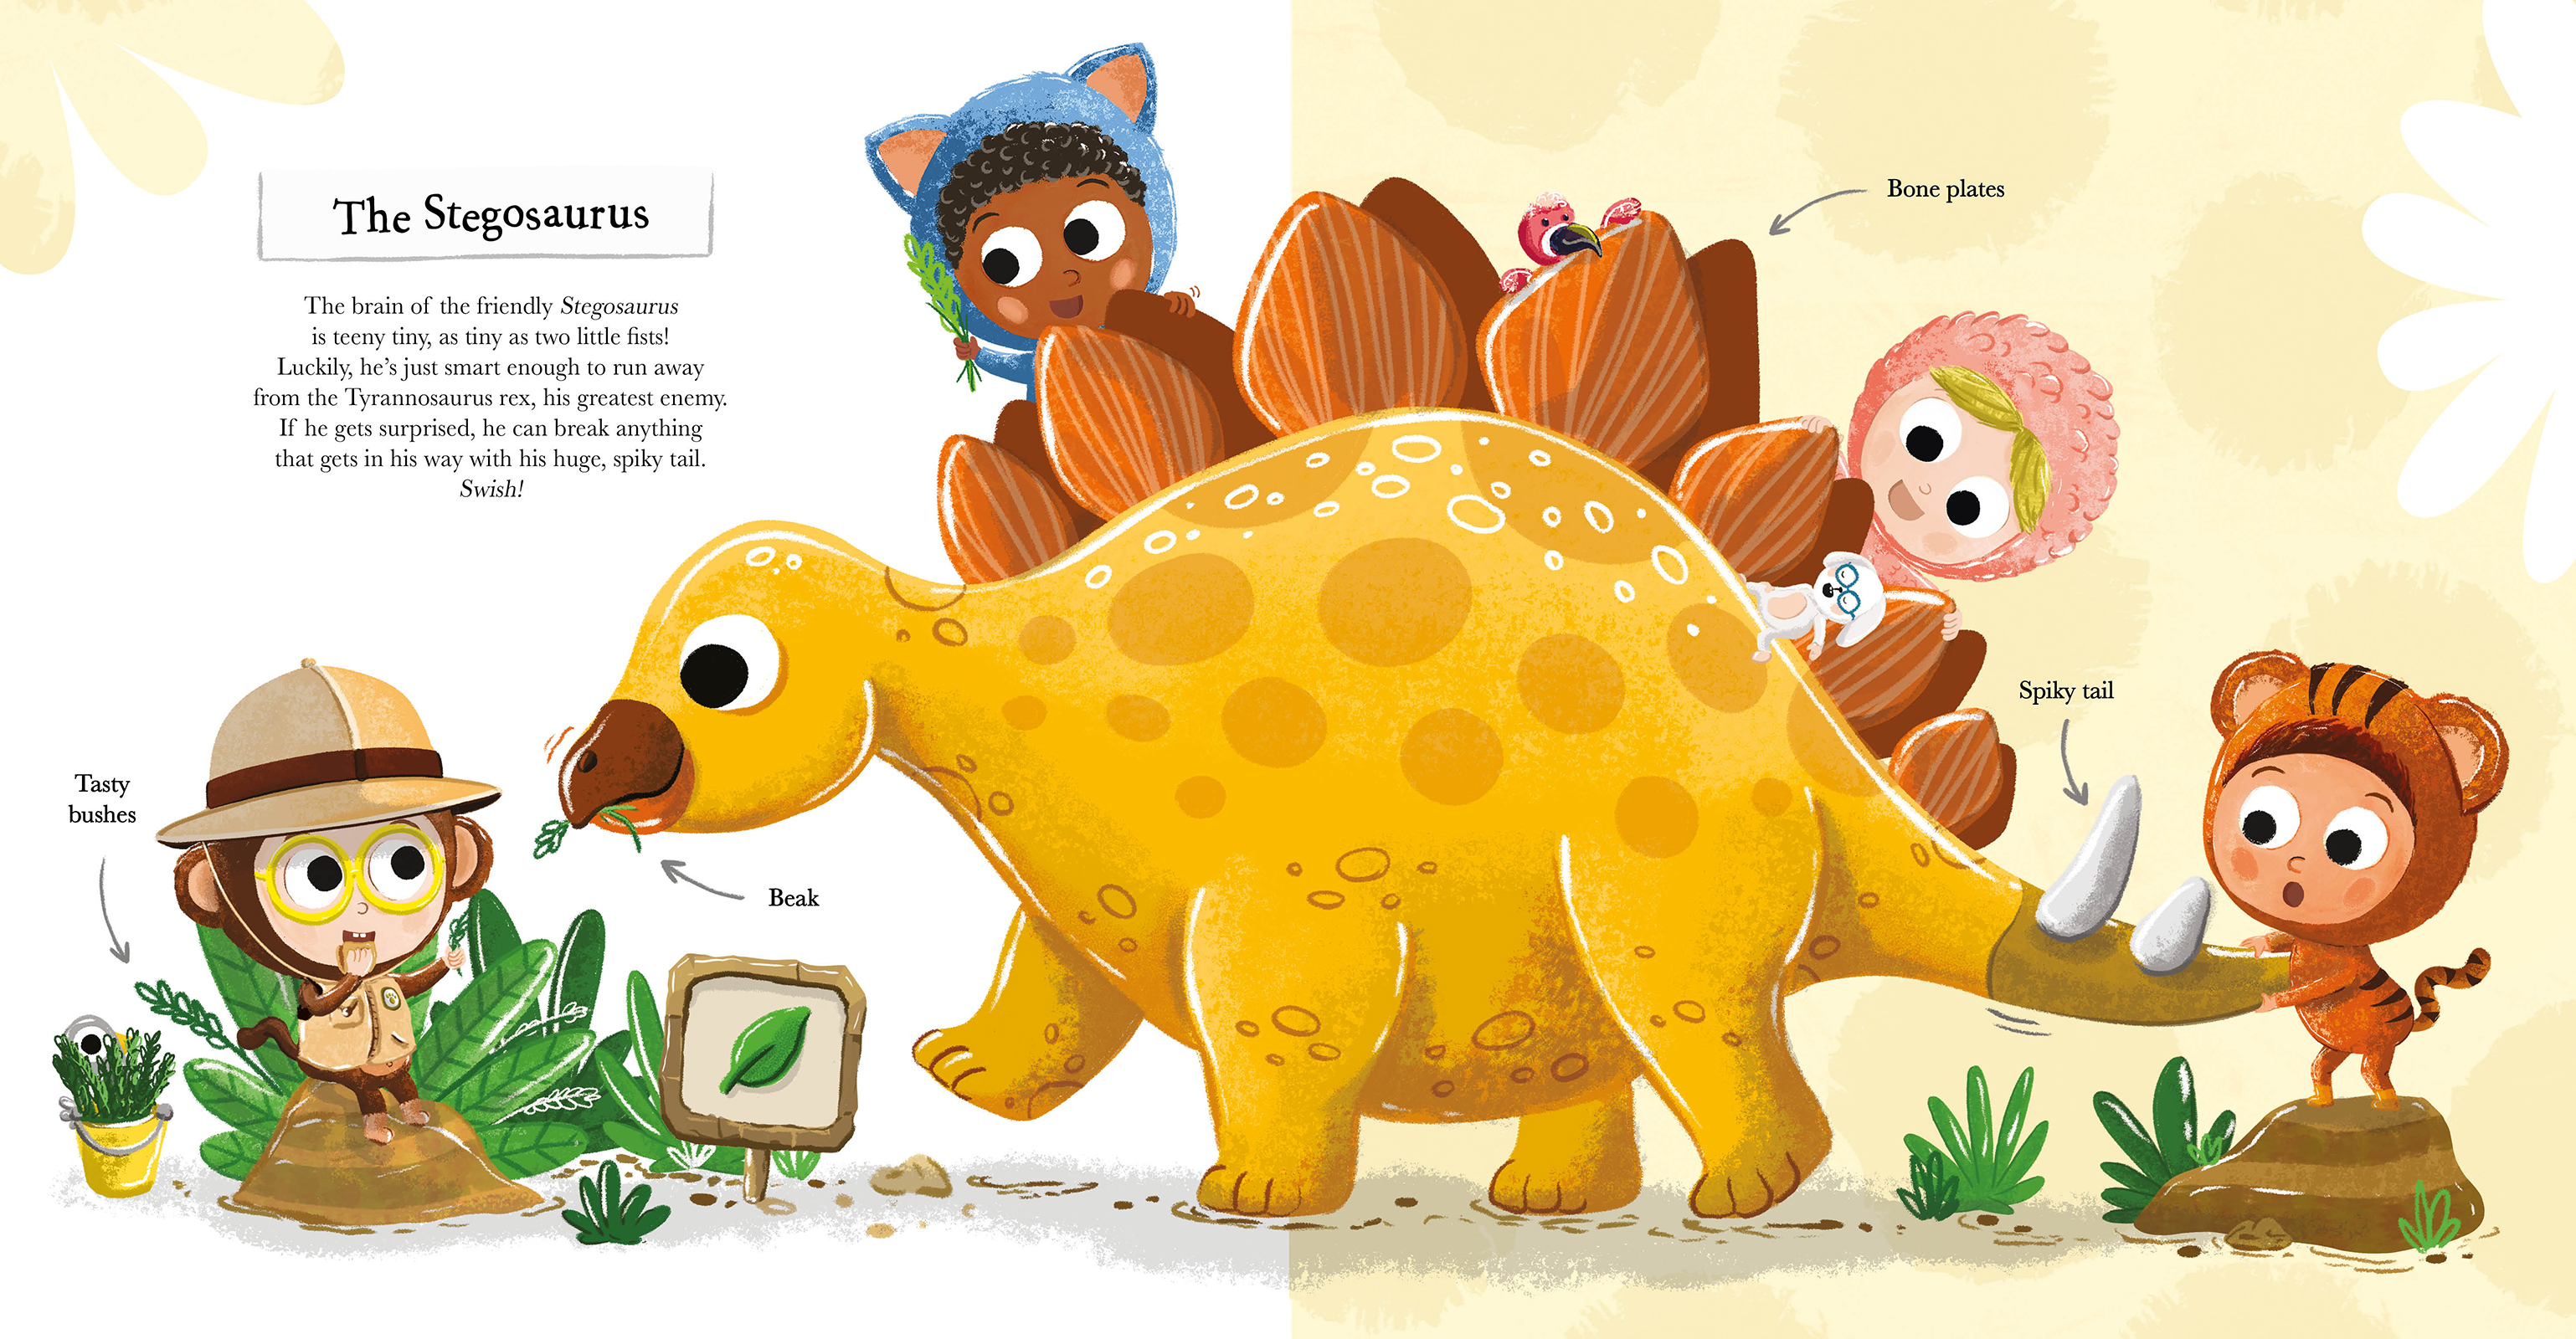 Furry Friends. Dinosaurs! The Big Book of Dinosaurs